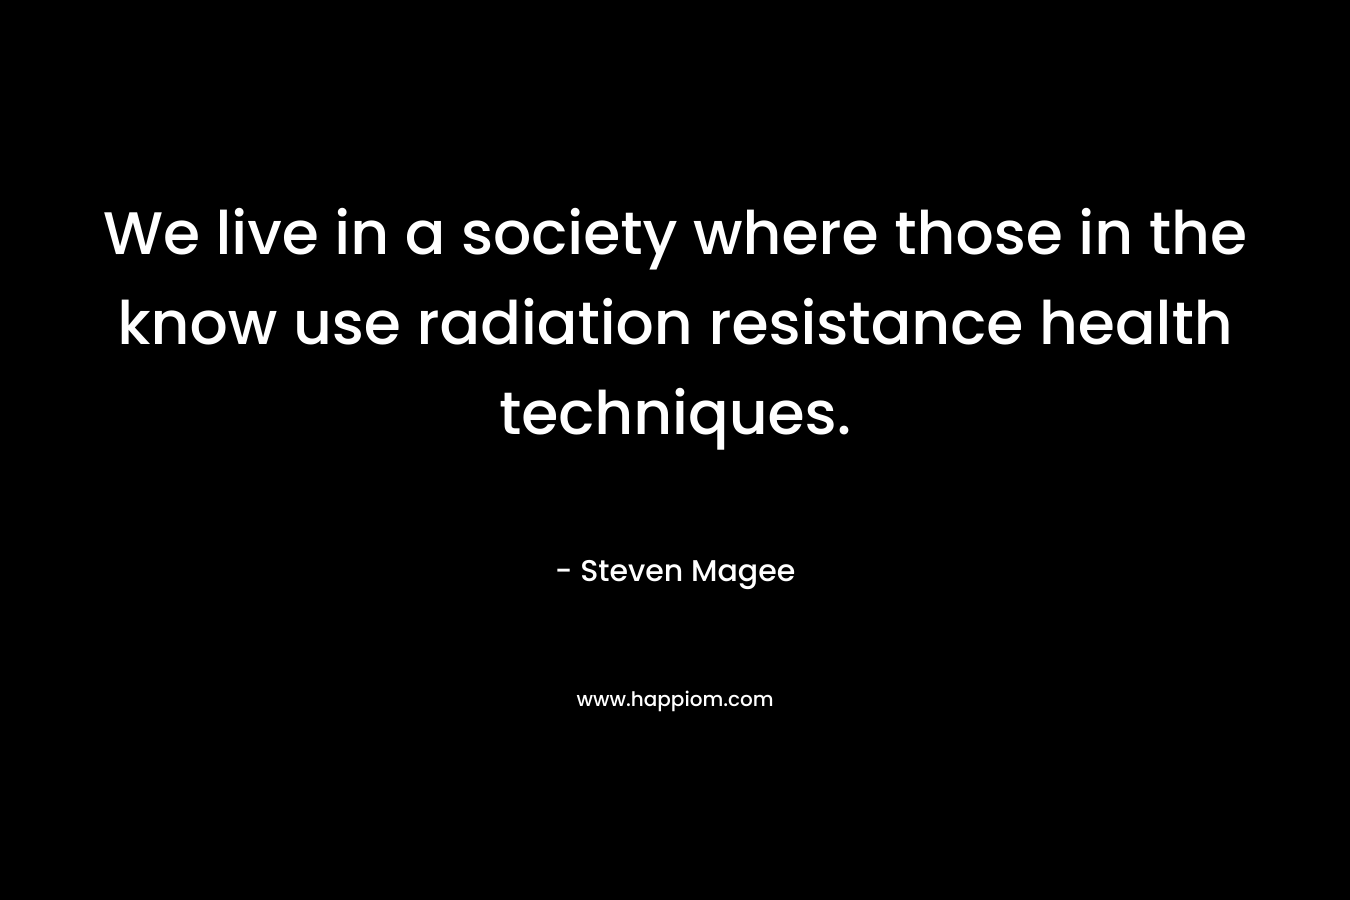 We live in a society where those in the know use radiation resistance health techniques. – Steven Magee